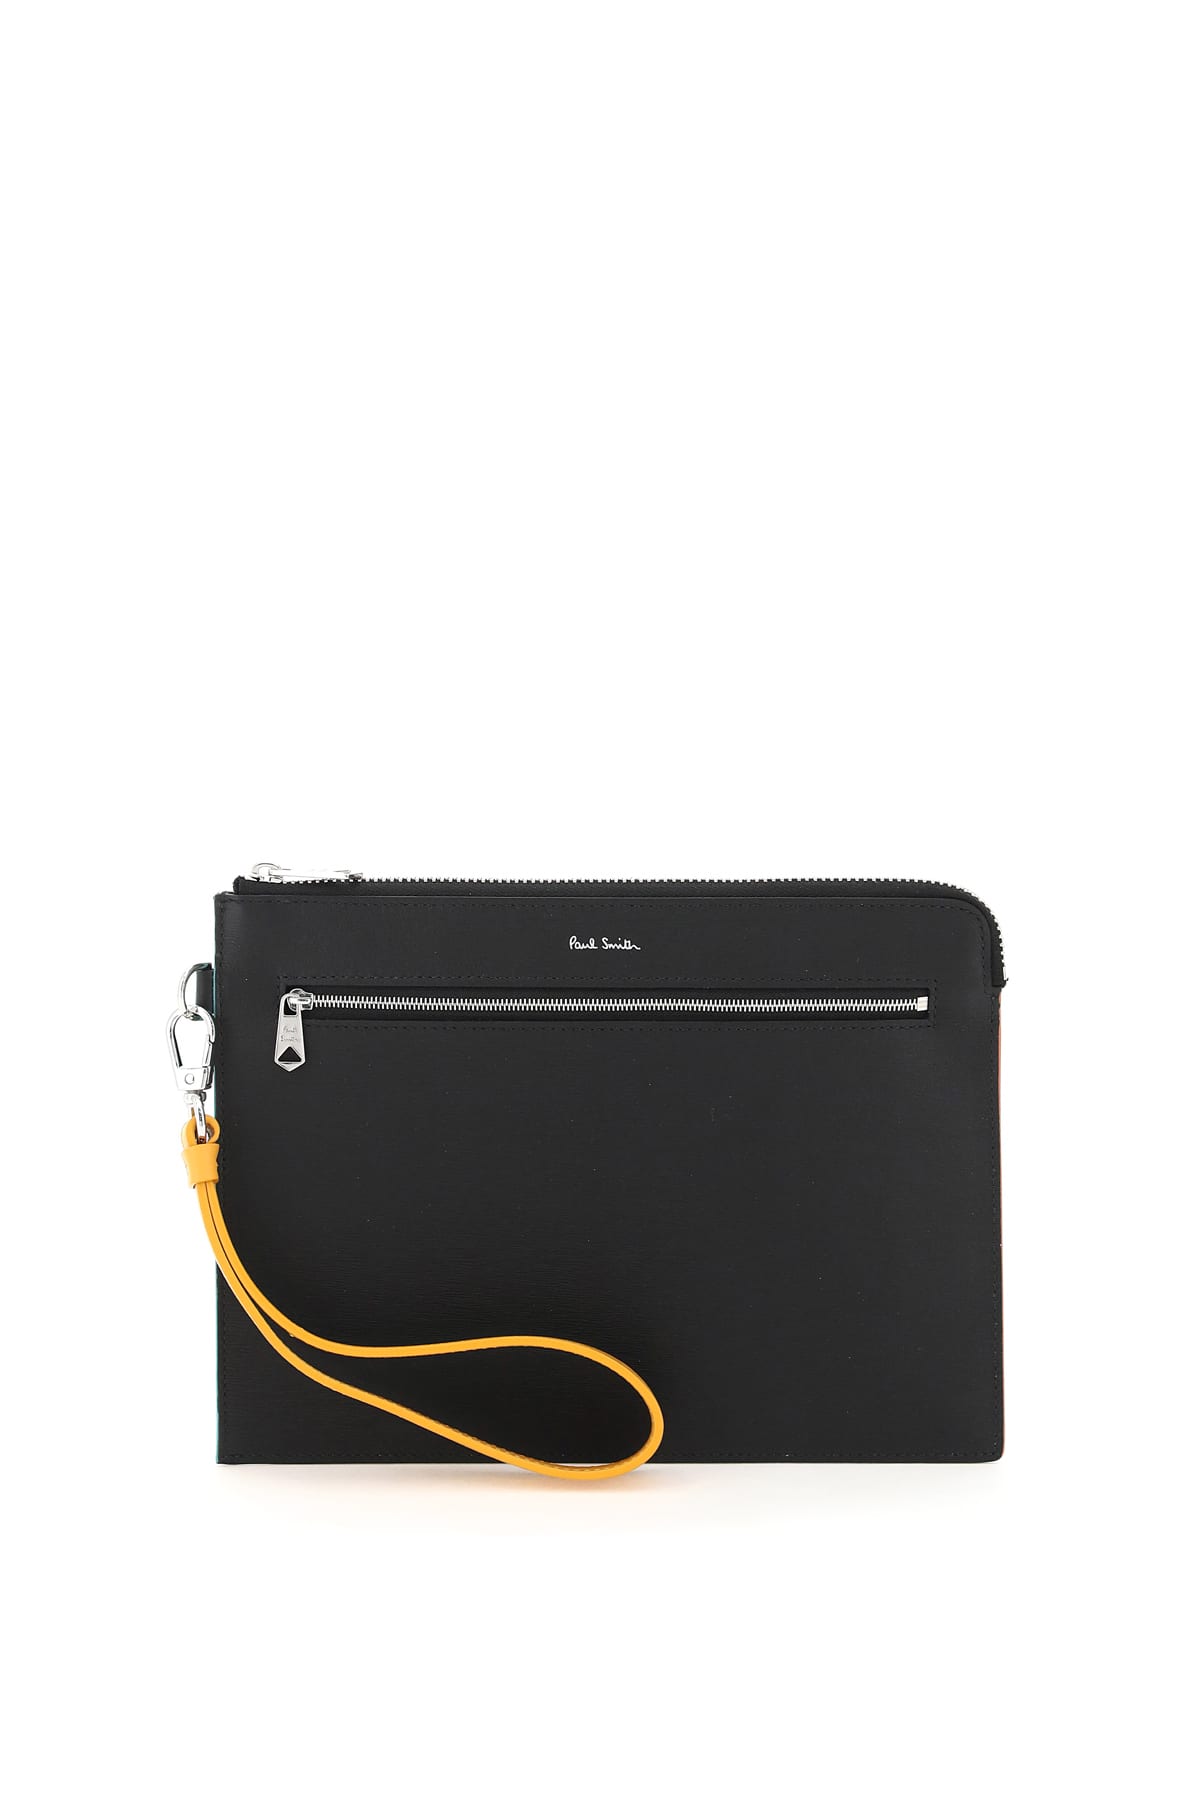 Paul Smith Two-tone Leather Pouch